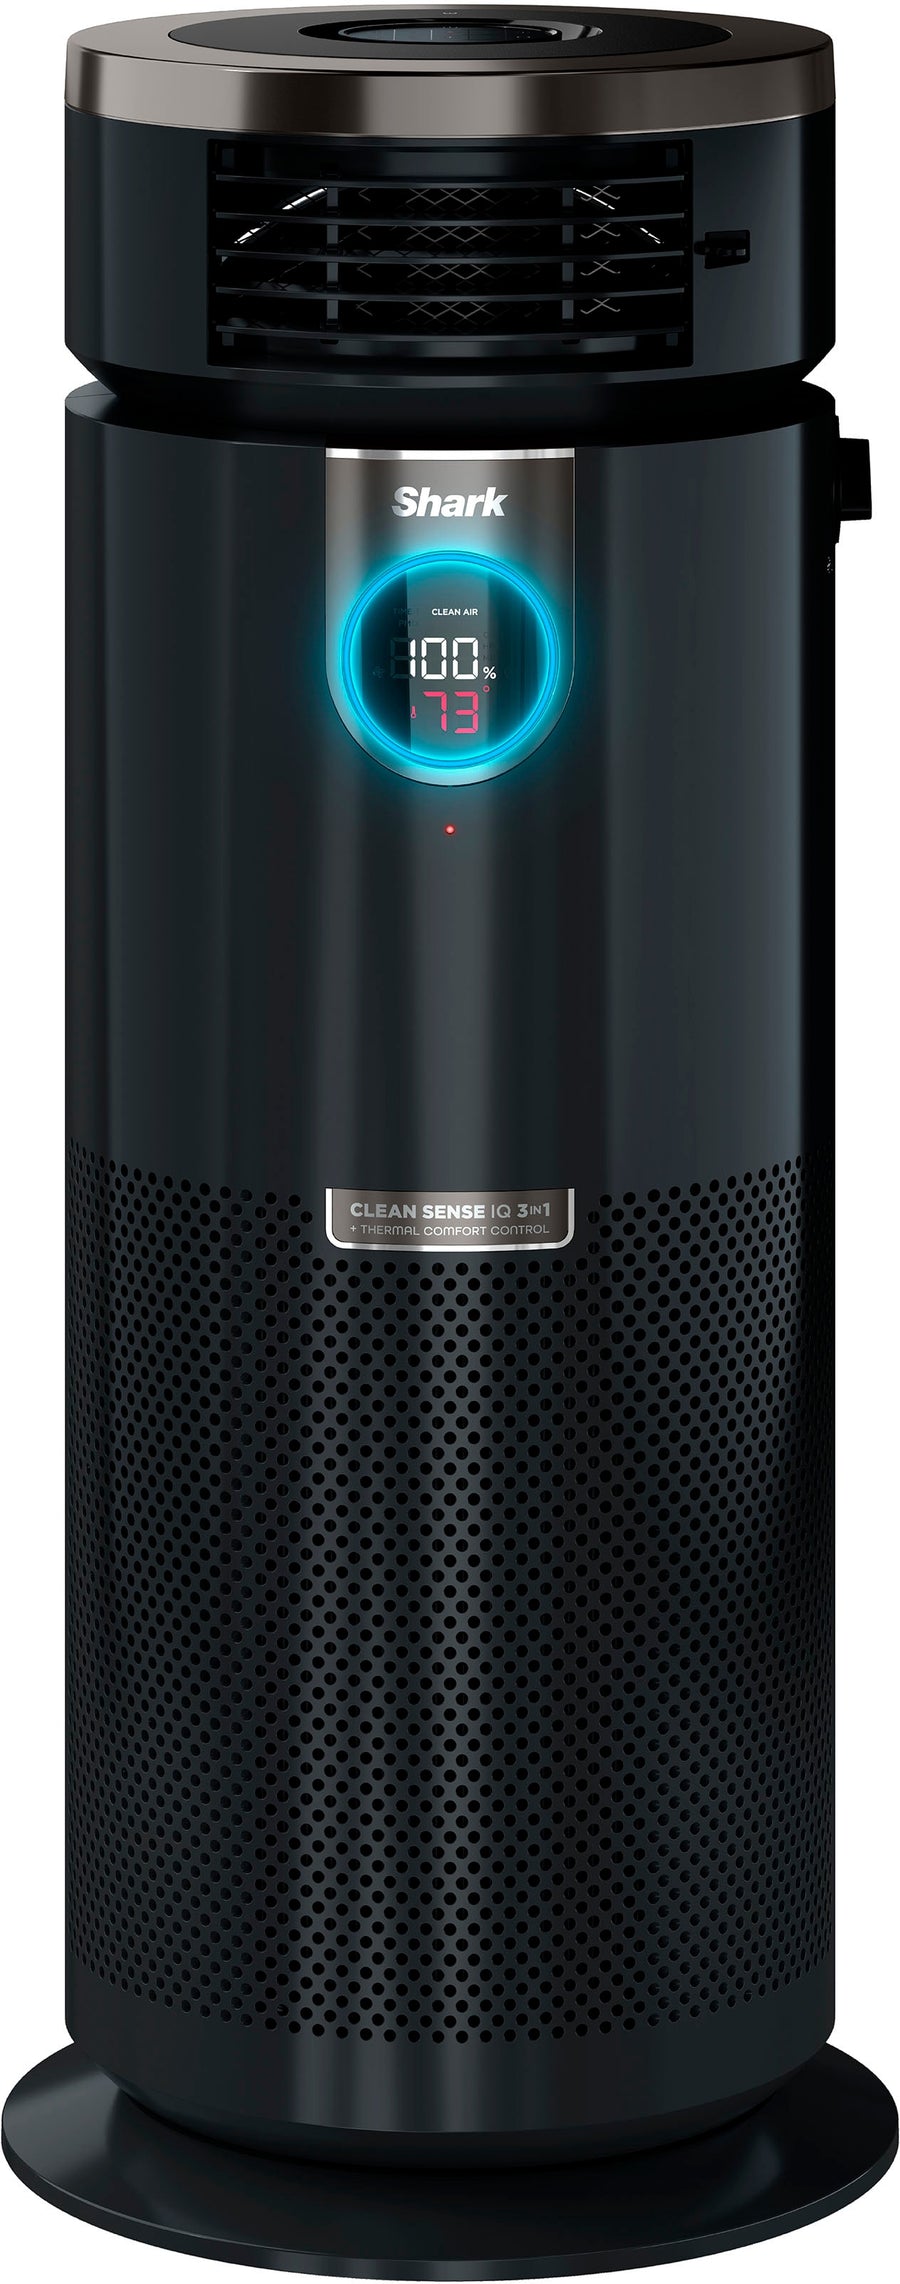 Shark - Air Purifier MAX 3-in-1 with True HEPA Filter, Air Purifier, Purified Heat, Purifed Fan, Odor Lock, 1000 sq. ft. - Black_0